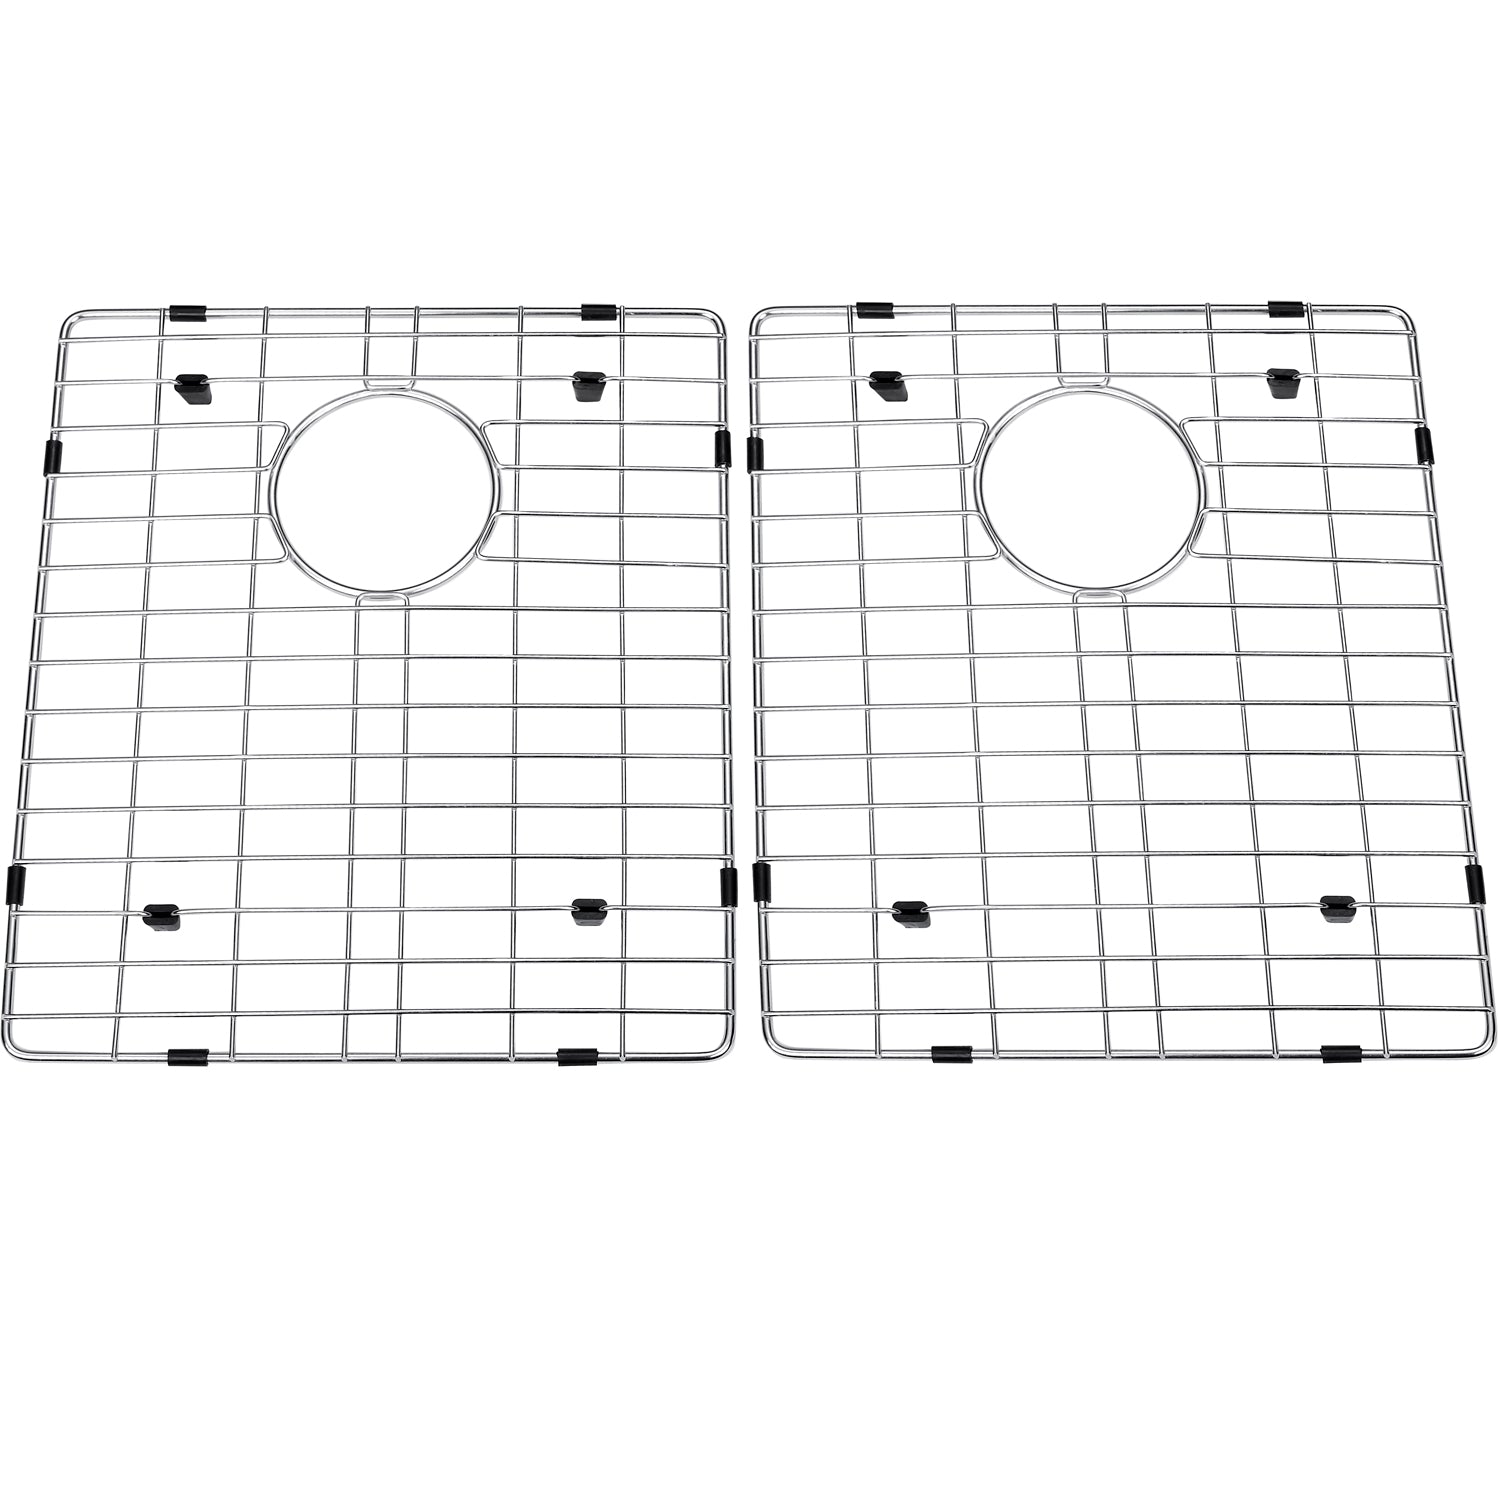 DAX Grid for Kitchen Sink, Stainless Steel Body, Chrome Finish, Compatible with DAX-3118B-X (GRID-3118B-X)